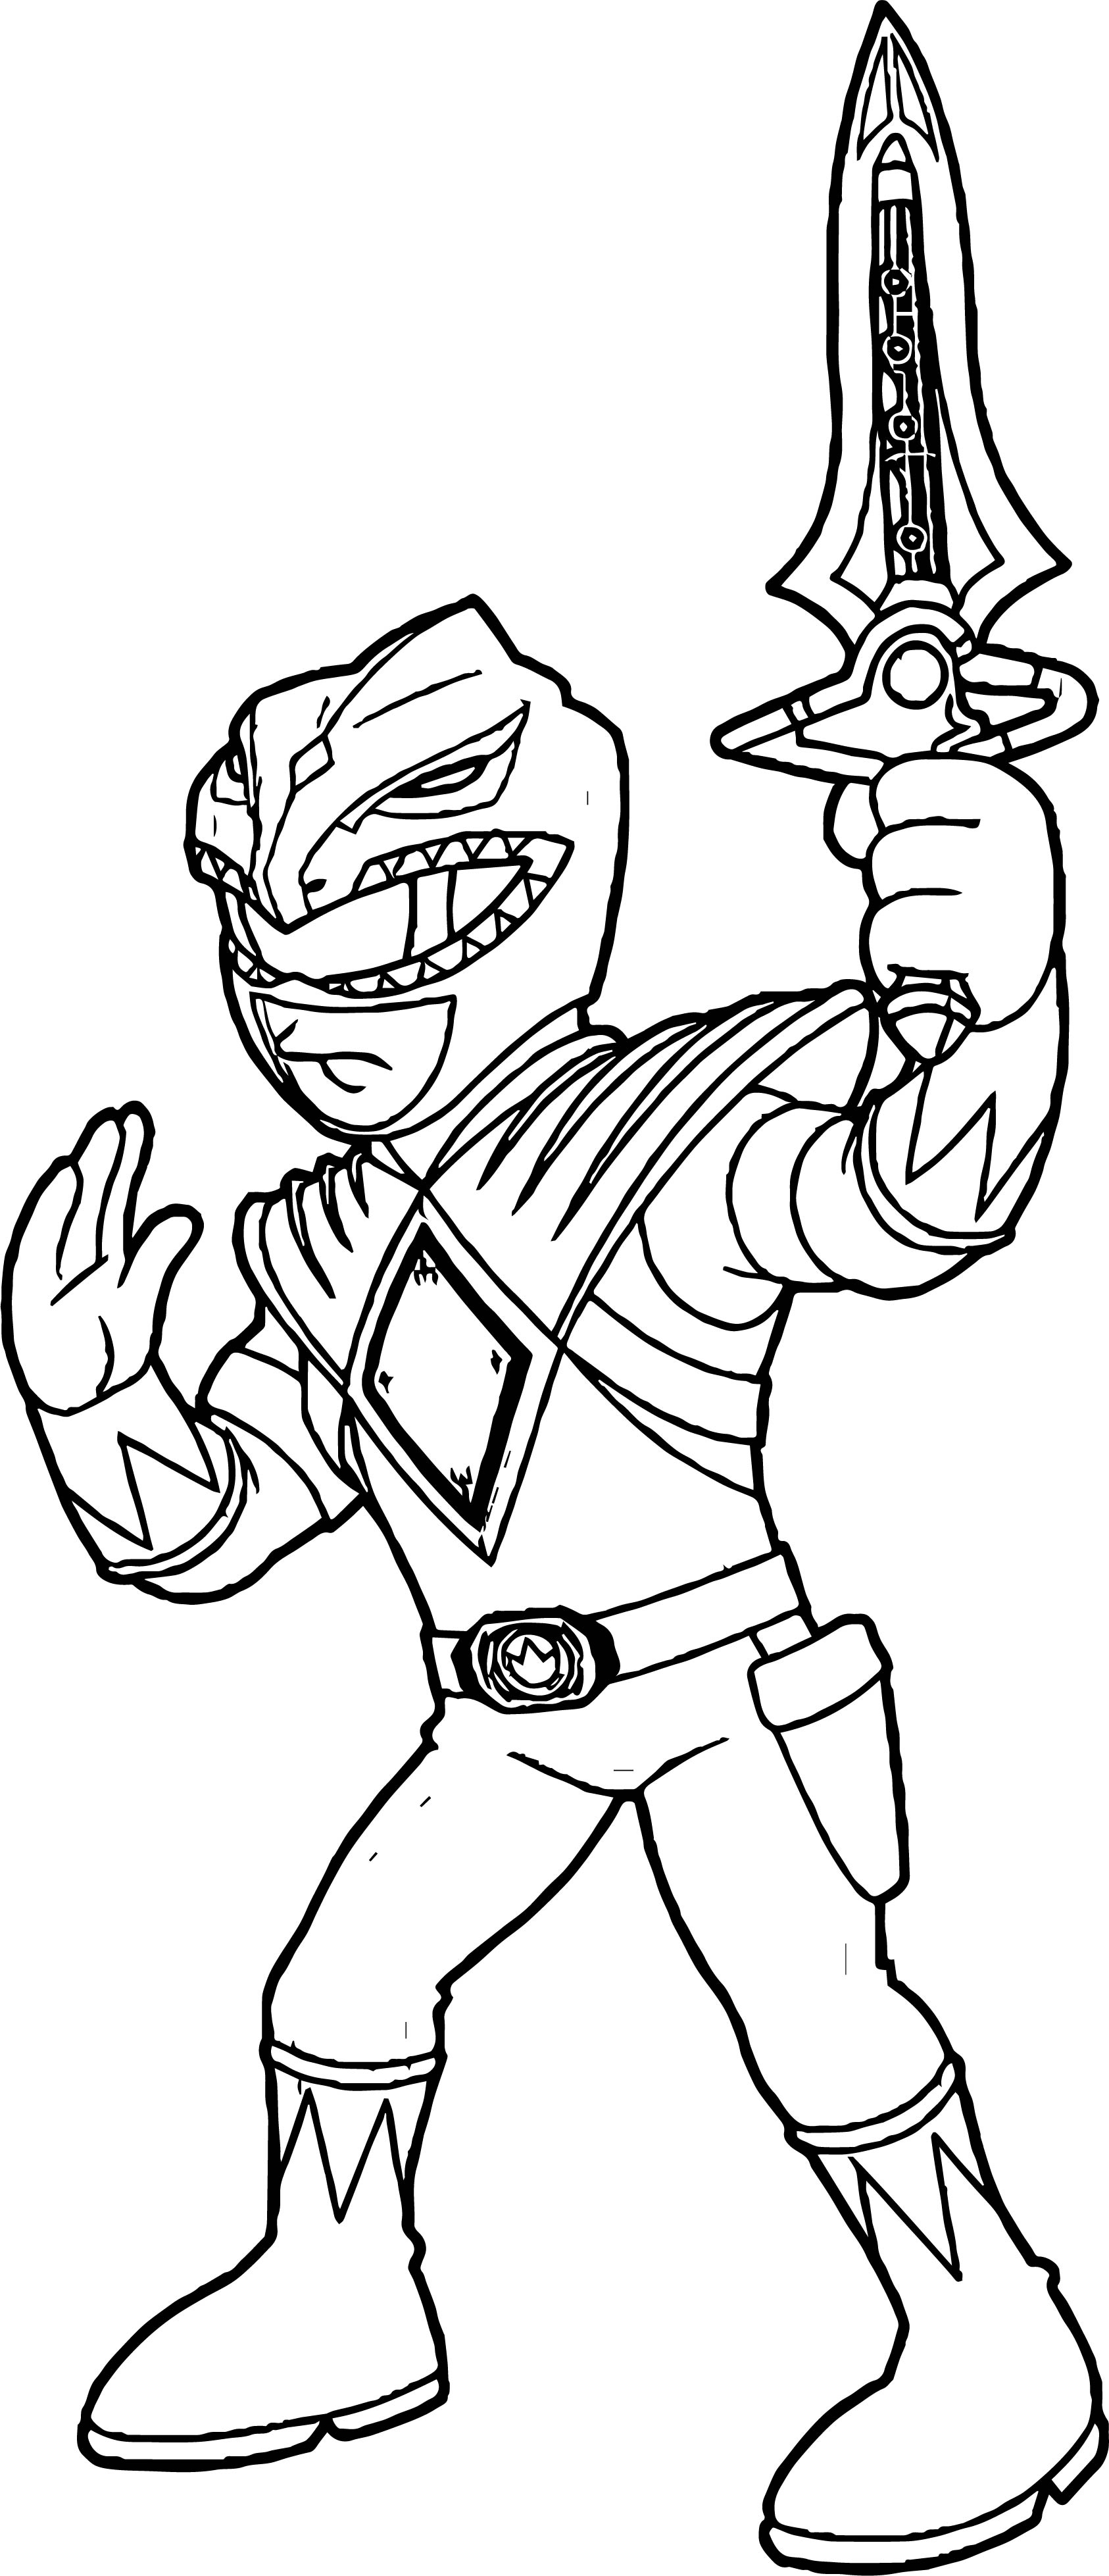 Blue Power Ranger Coloring Pages at Free printable